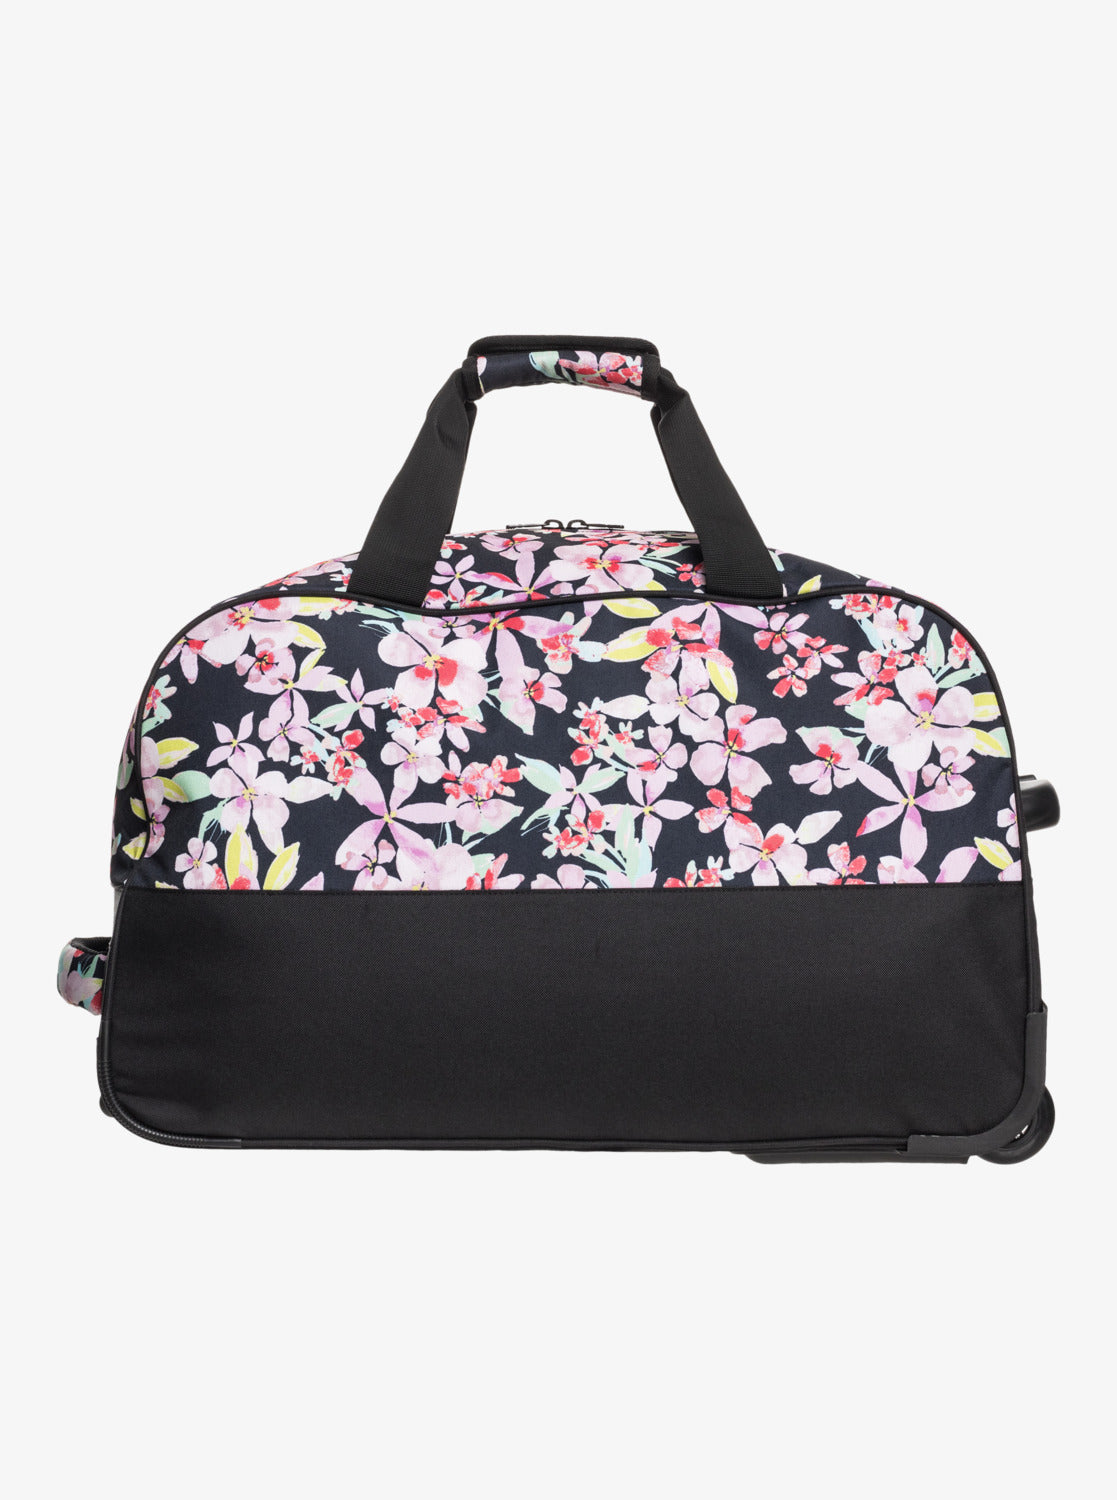 Roxy Feel It All Large Wheelie Duffle Bag in anthracite new life colourway from side lying flat